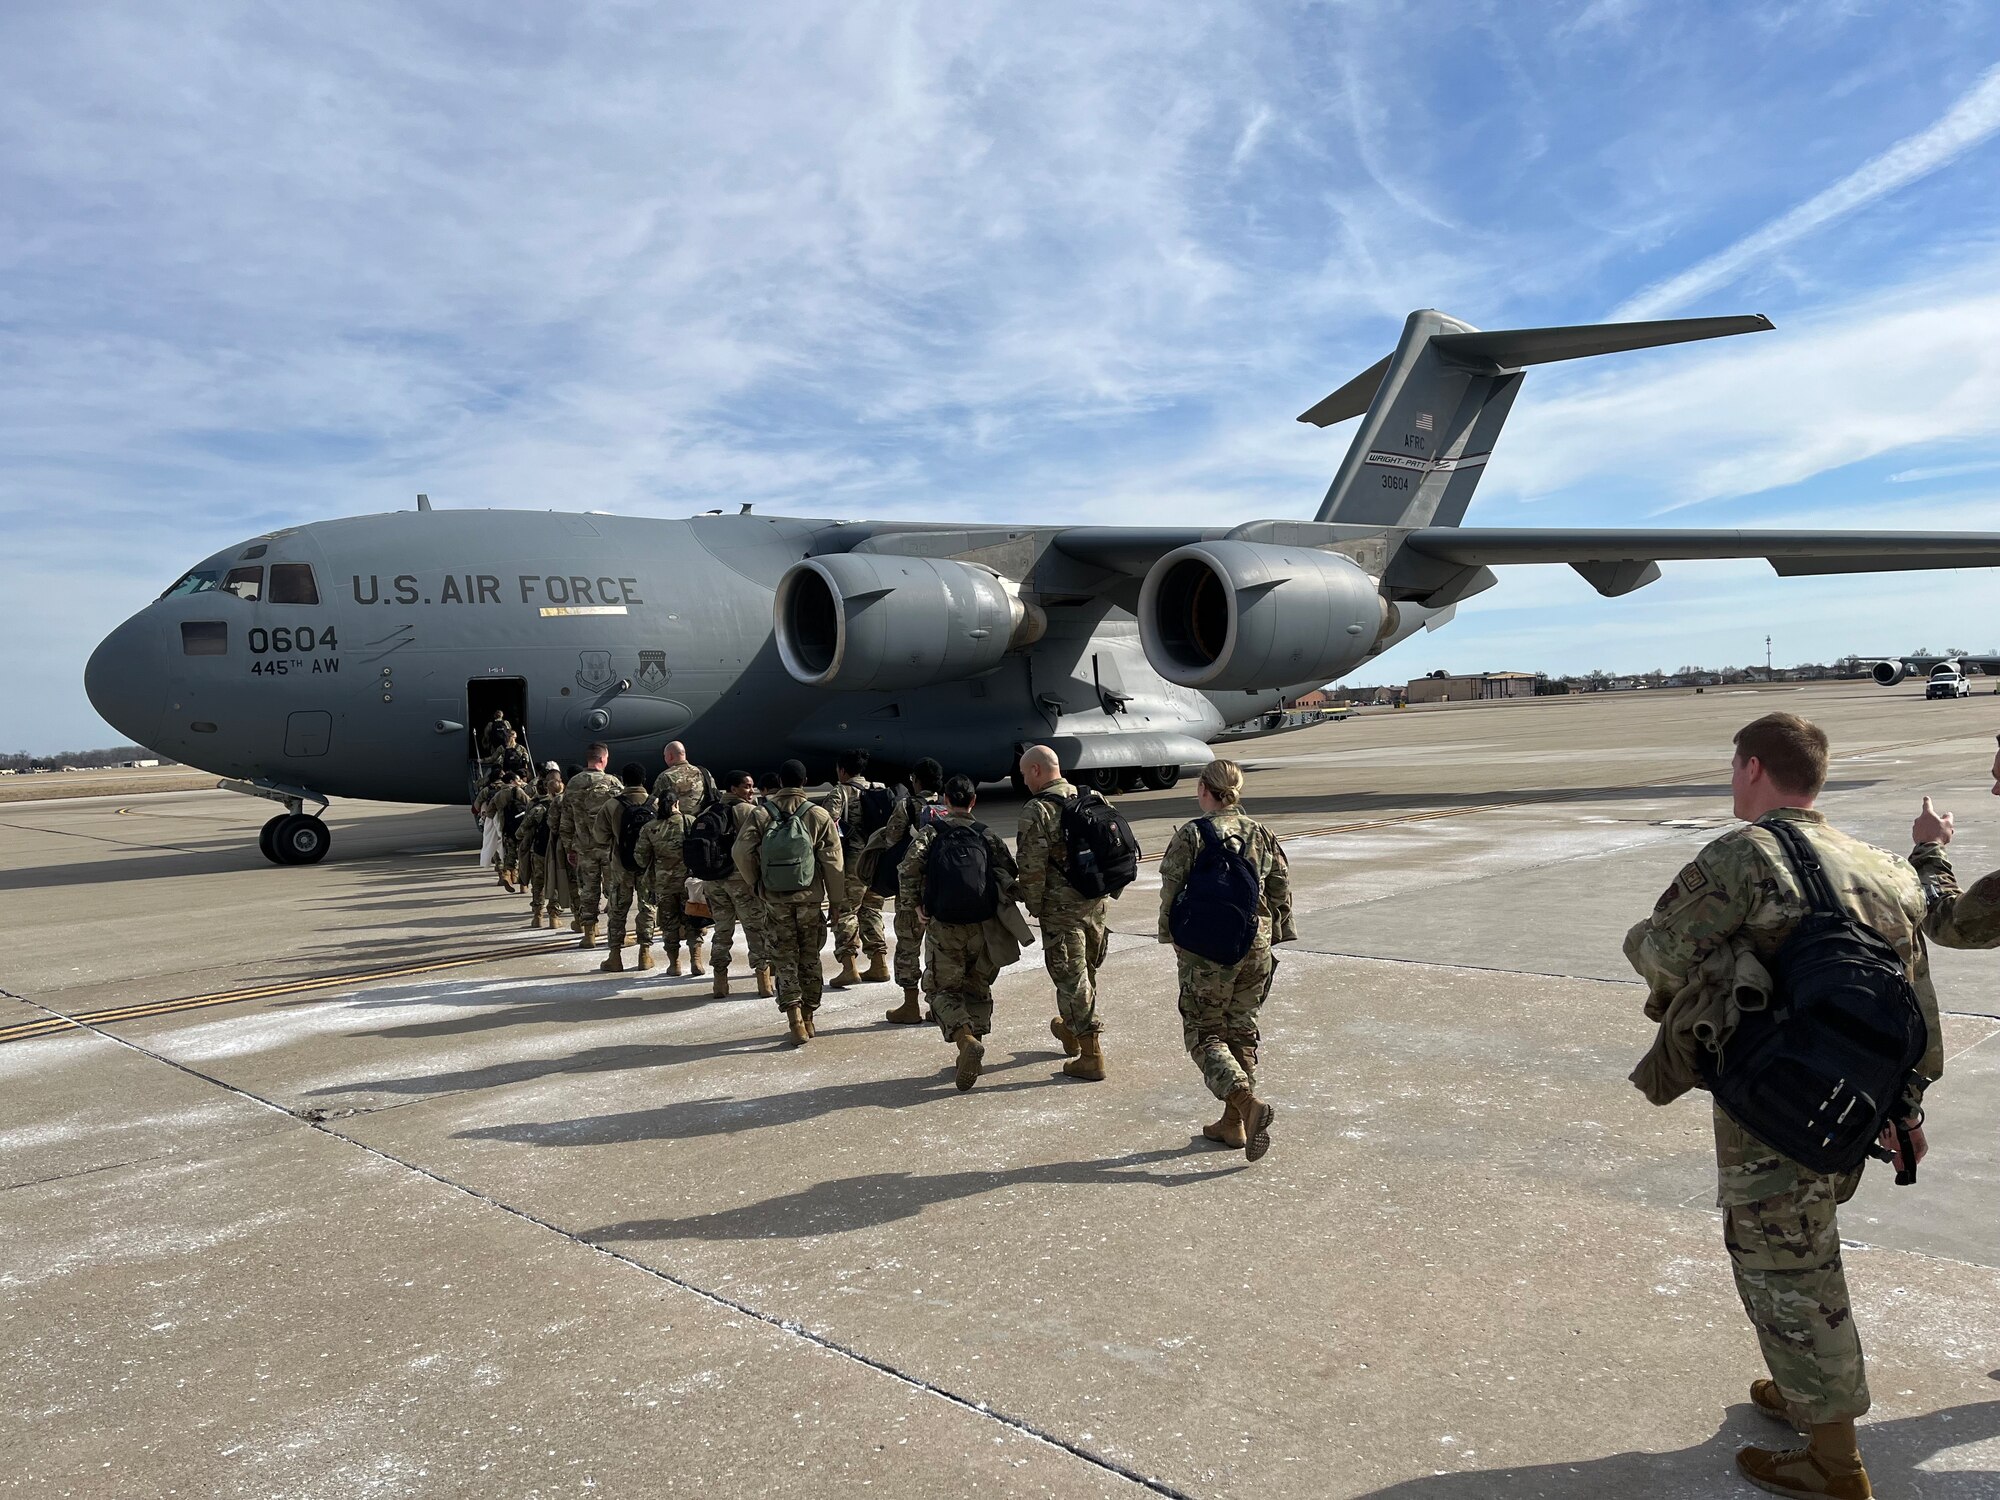 Citizen Airmen from the 932nd Airlift Wing at Scott Air Force Base board a C-17 Globemaster III on Feb. 6, 2023 in support of Operation Joint Endeavour training exercise.